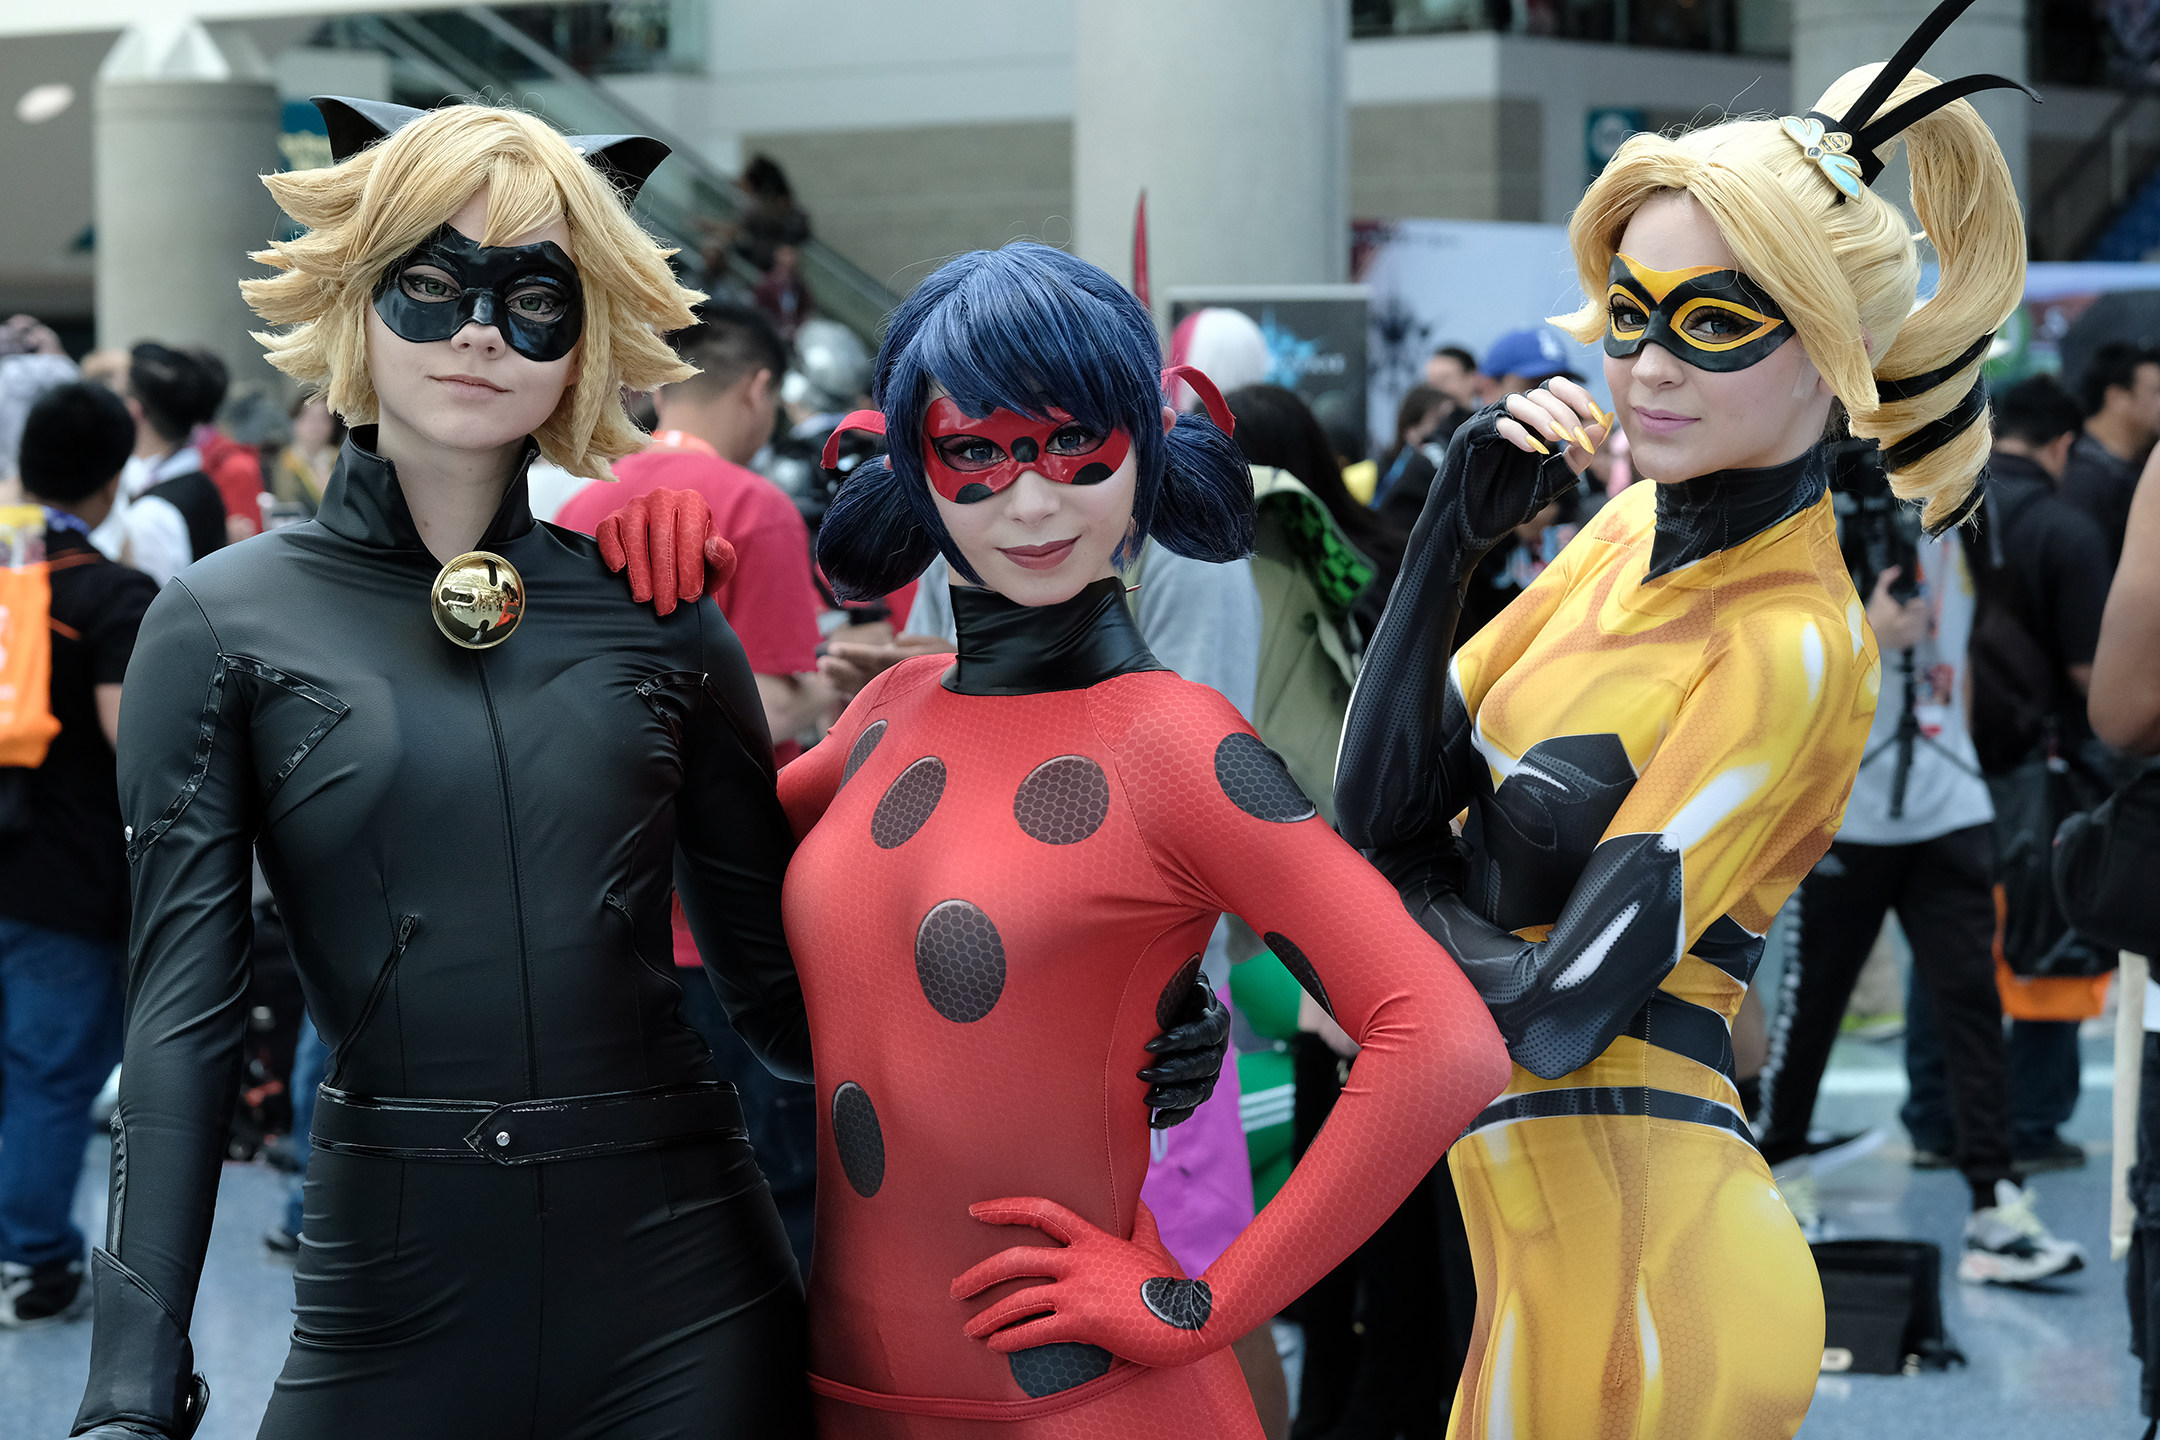 9 Tips to Make Friends at Your Next Anime Convention